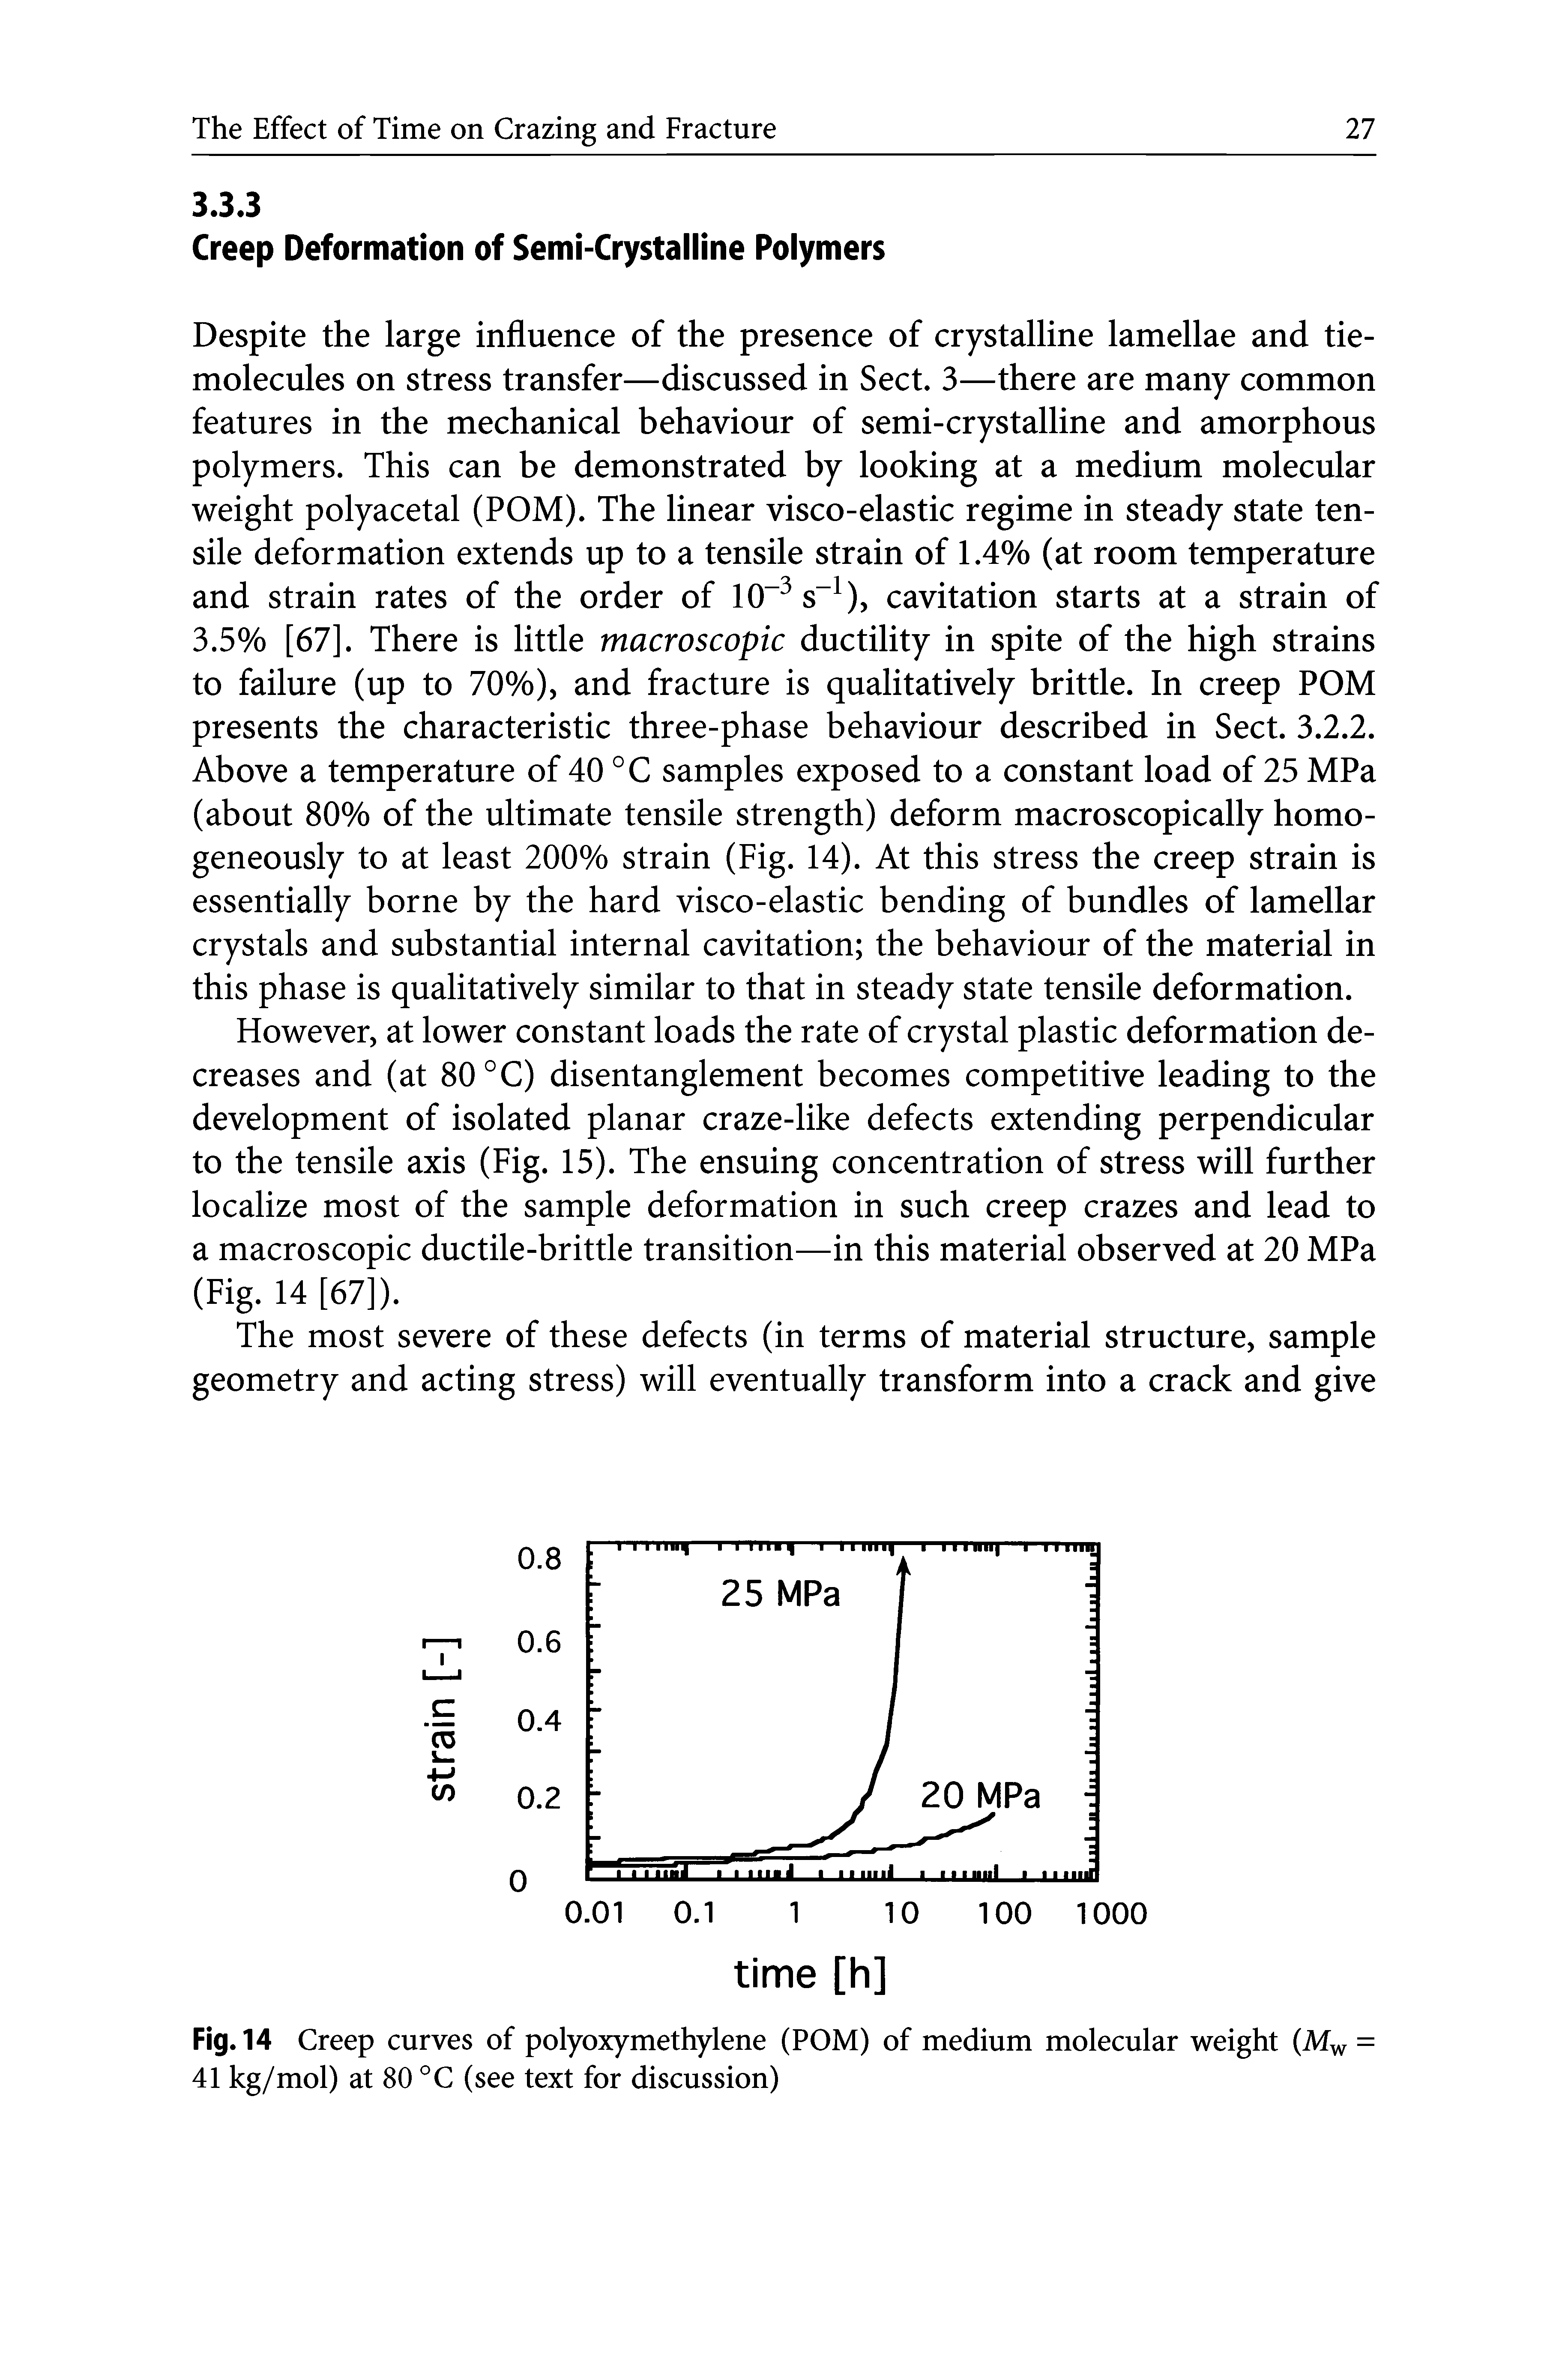 Fig. 14 Creep curves of polyoxymethylene (POM) of medium molecular weight (Mw = 41 kg/mol) at 80 °C (see text for discussion)...